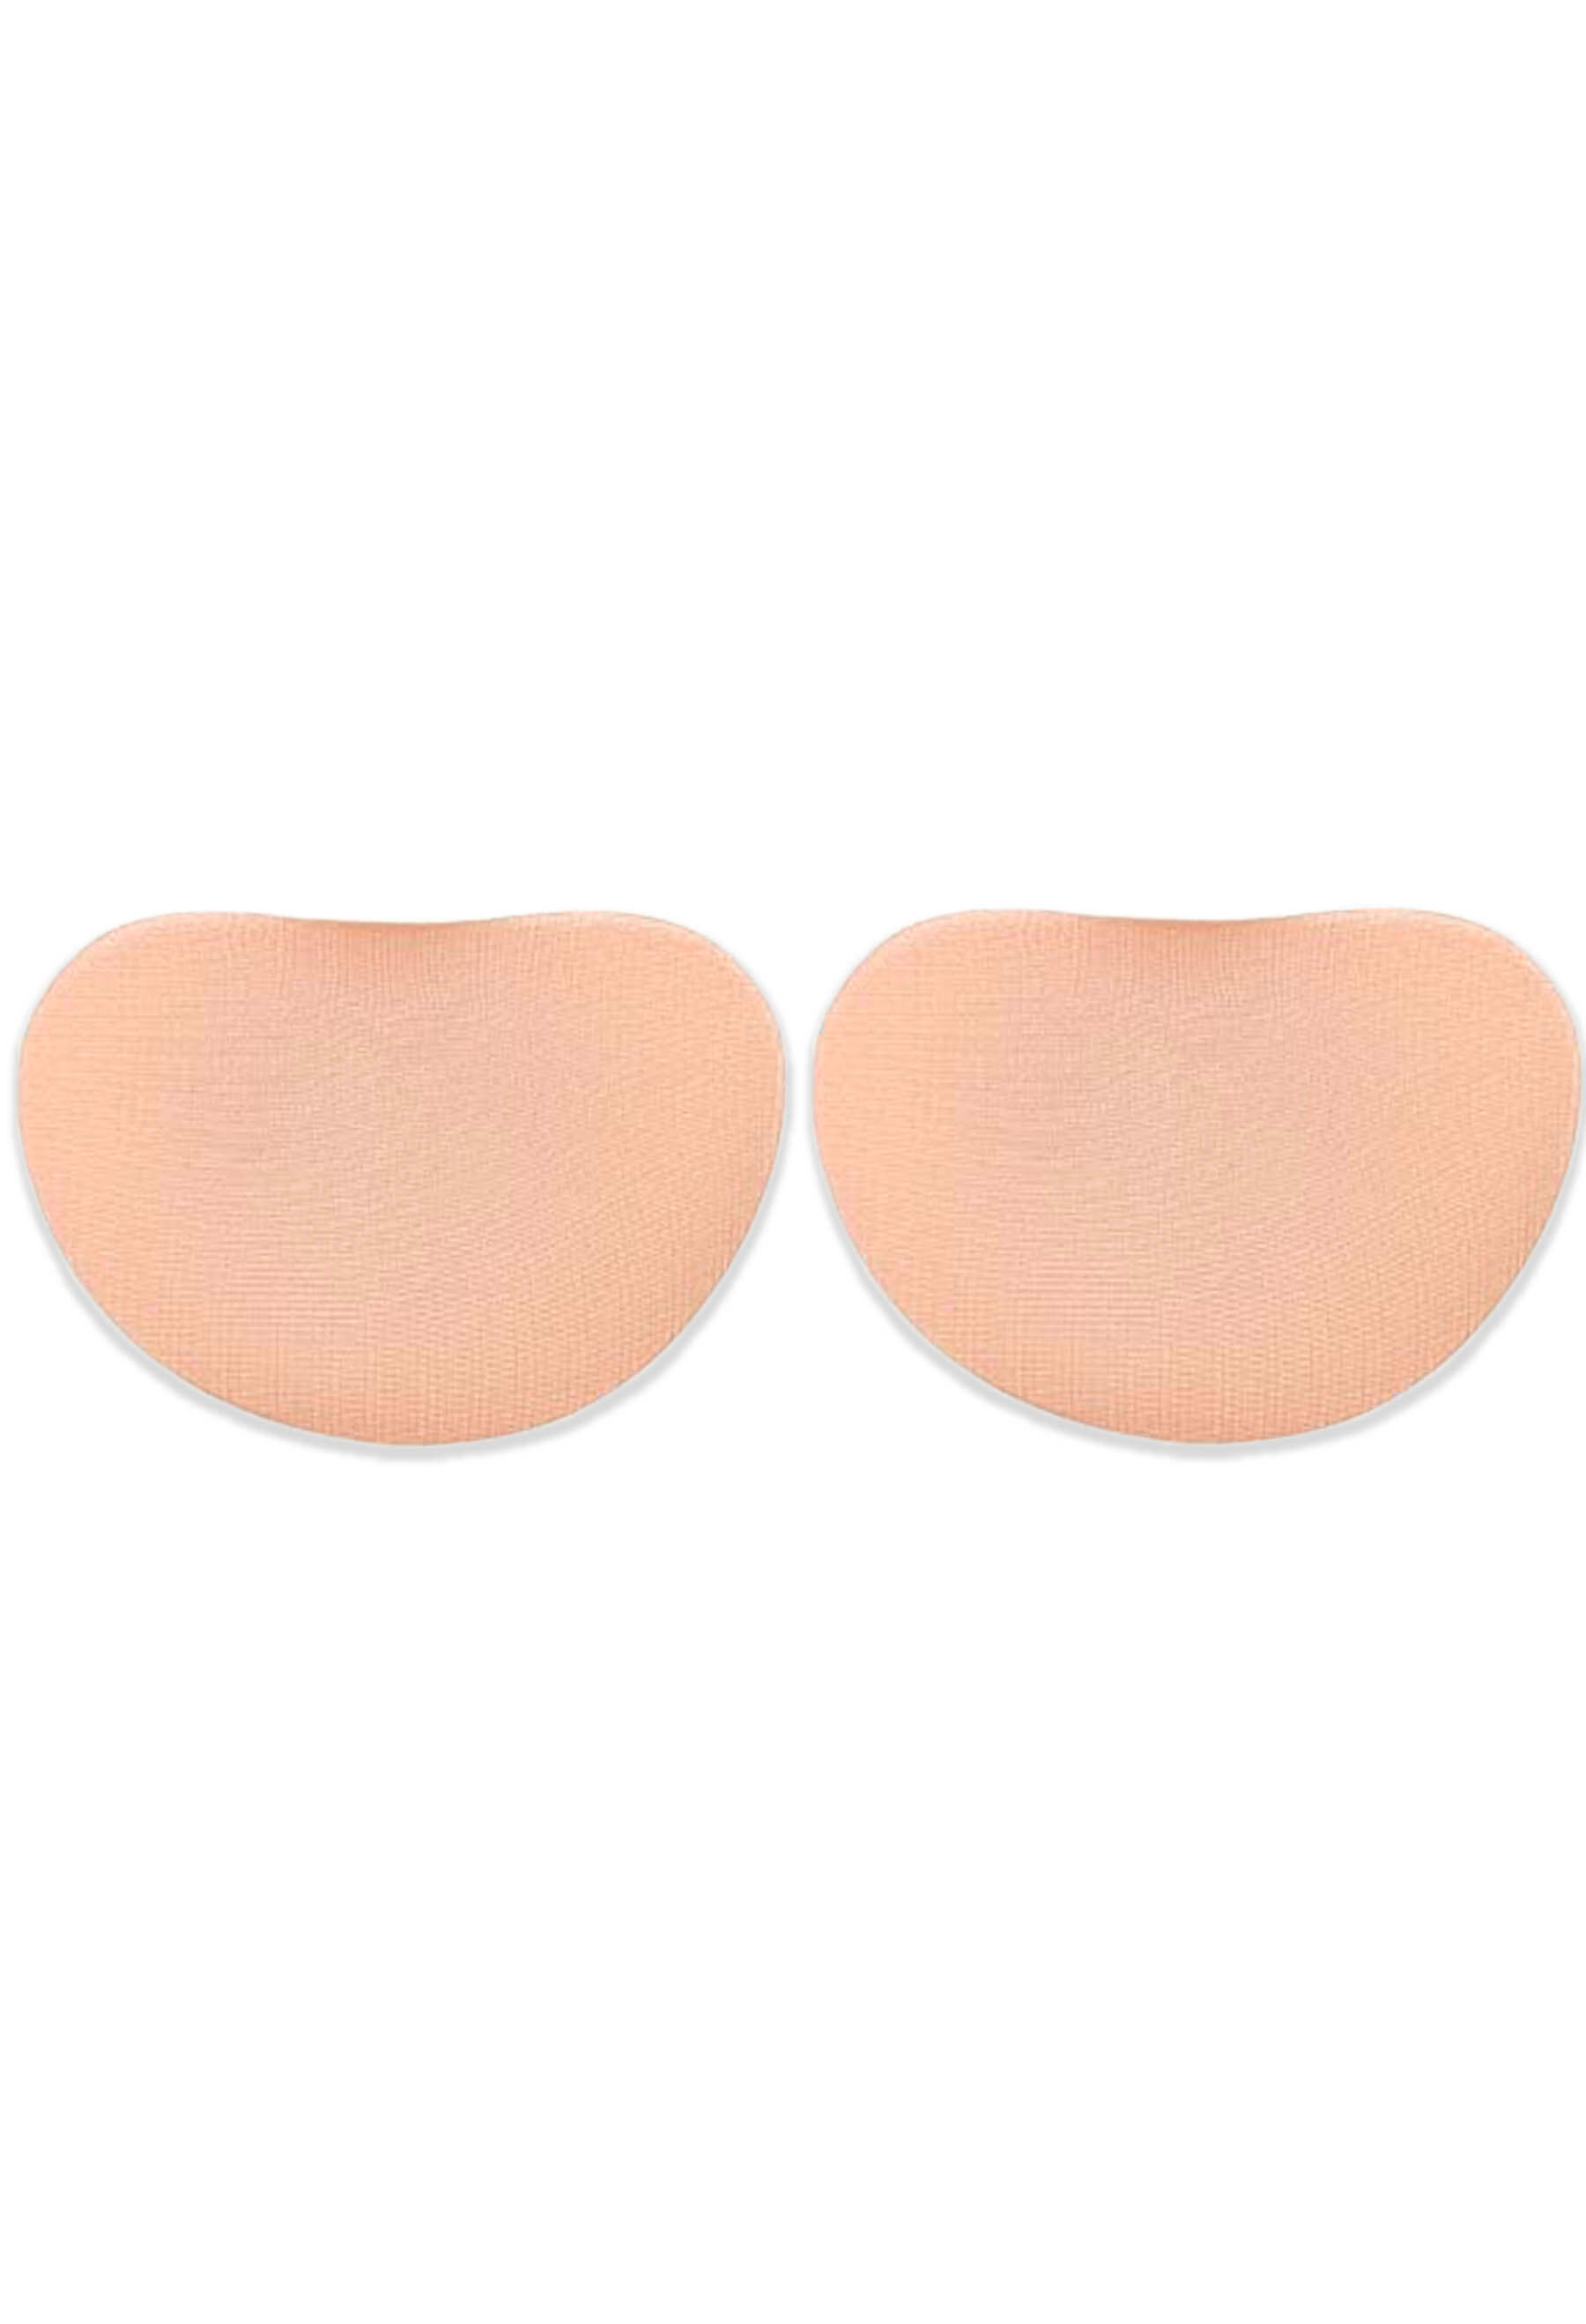 Silicone Breast Forms Cleavage Pushup Enhancers Pads Swimsuit